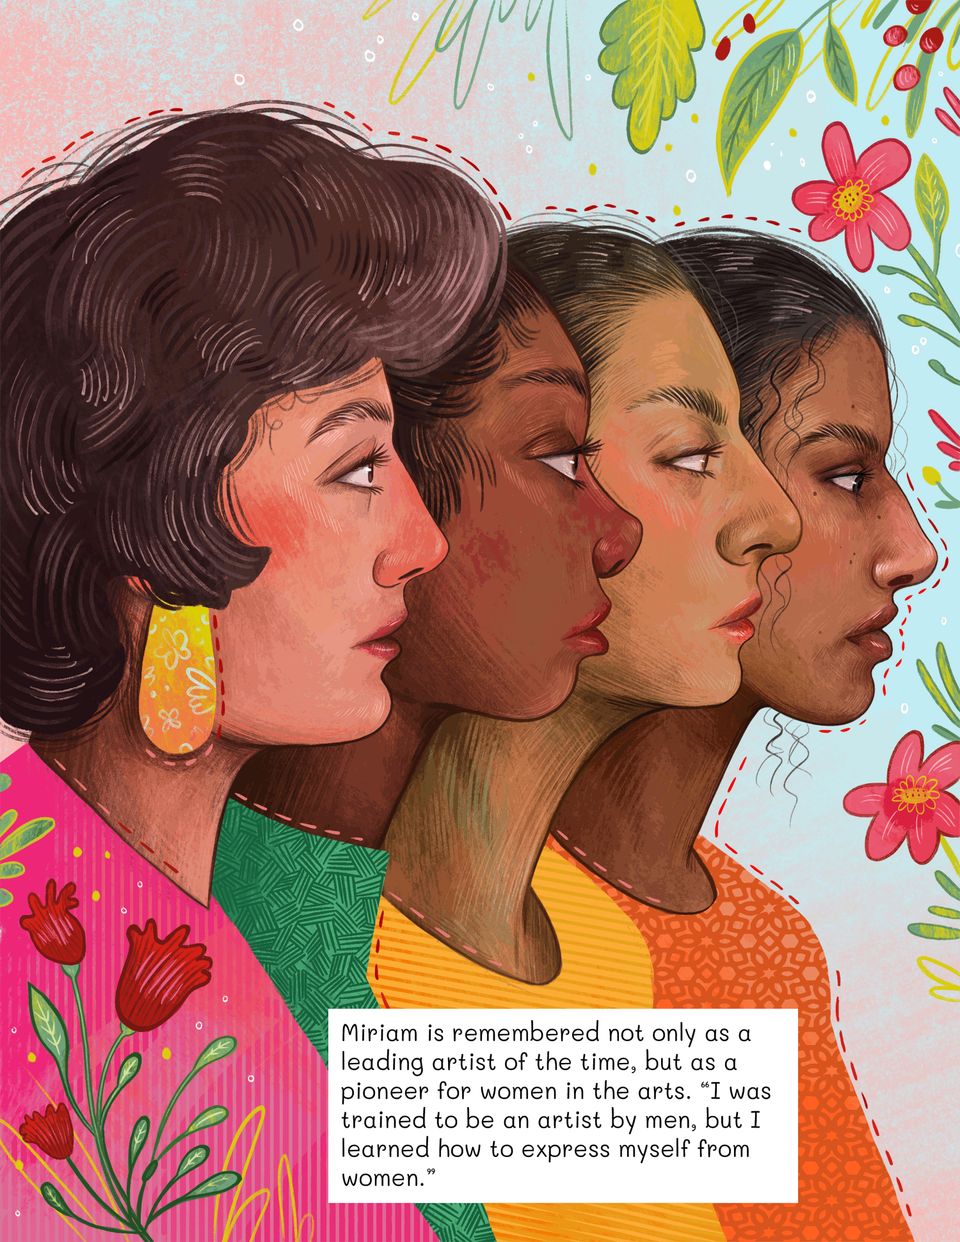 An illustration of four women’s overlapping profiles, with floral details on a blue and pink background, and a text box at the bottom.